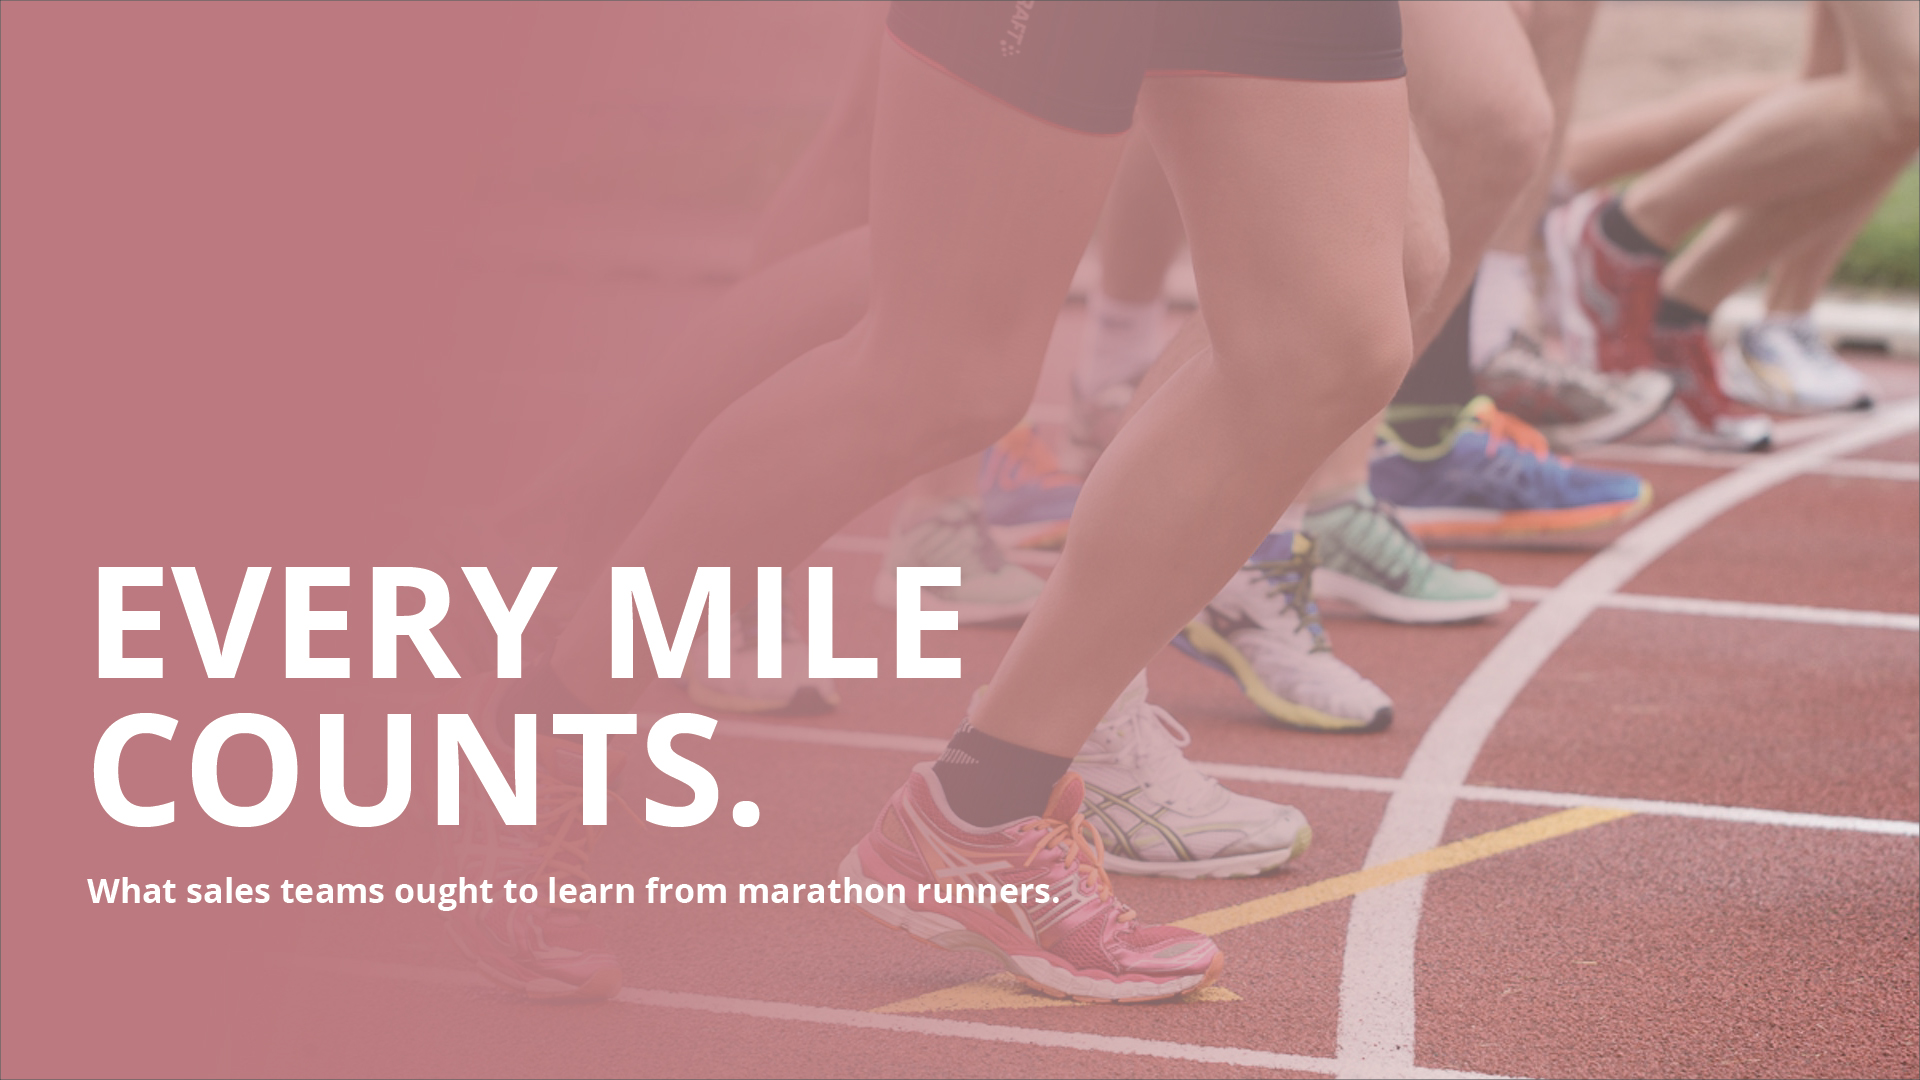 Every mile counts